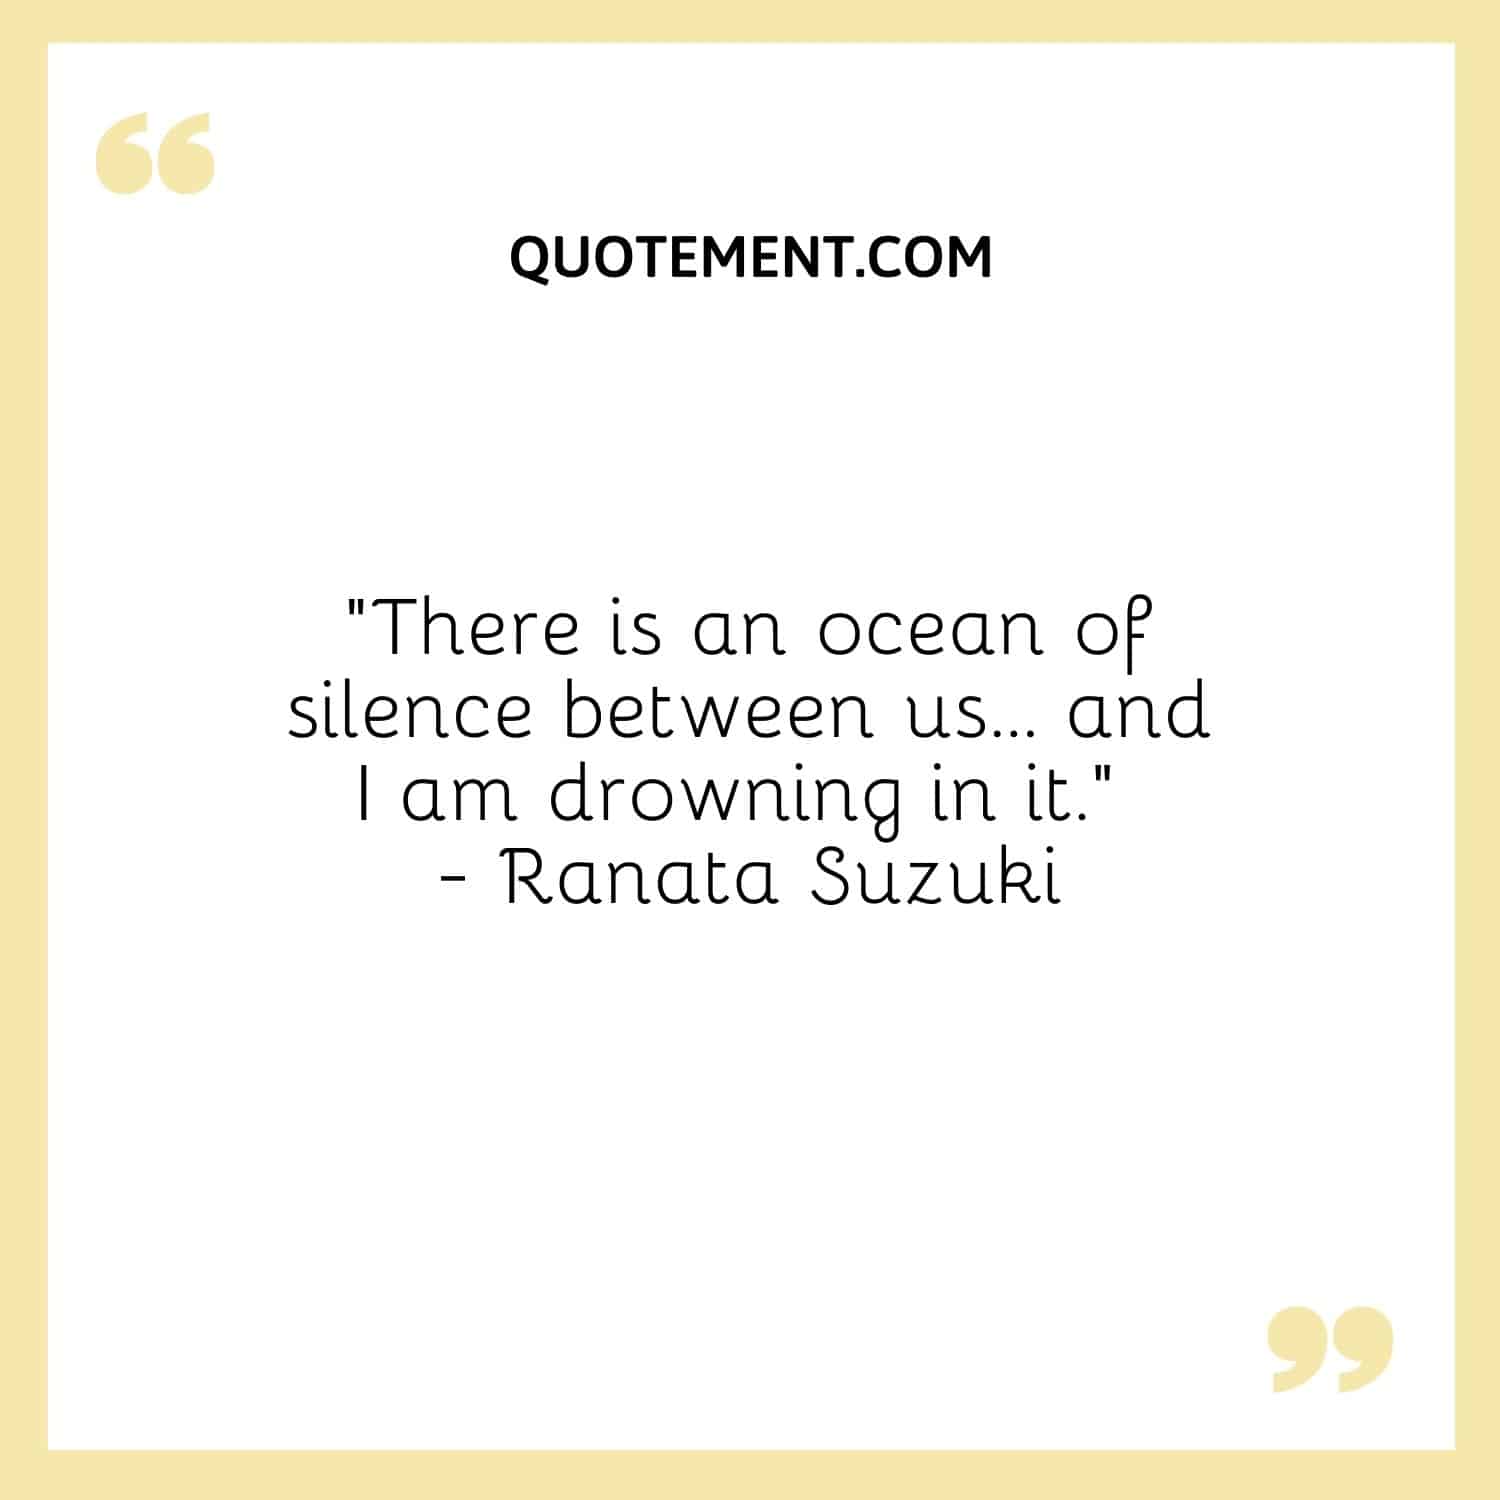 “There is an ocean of silence between us… and I am drowning in it.” — Ranata Suzuki